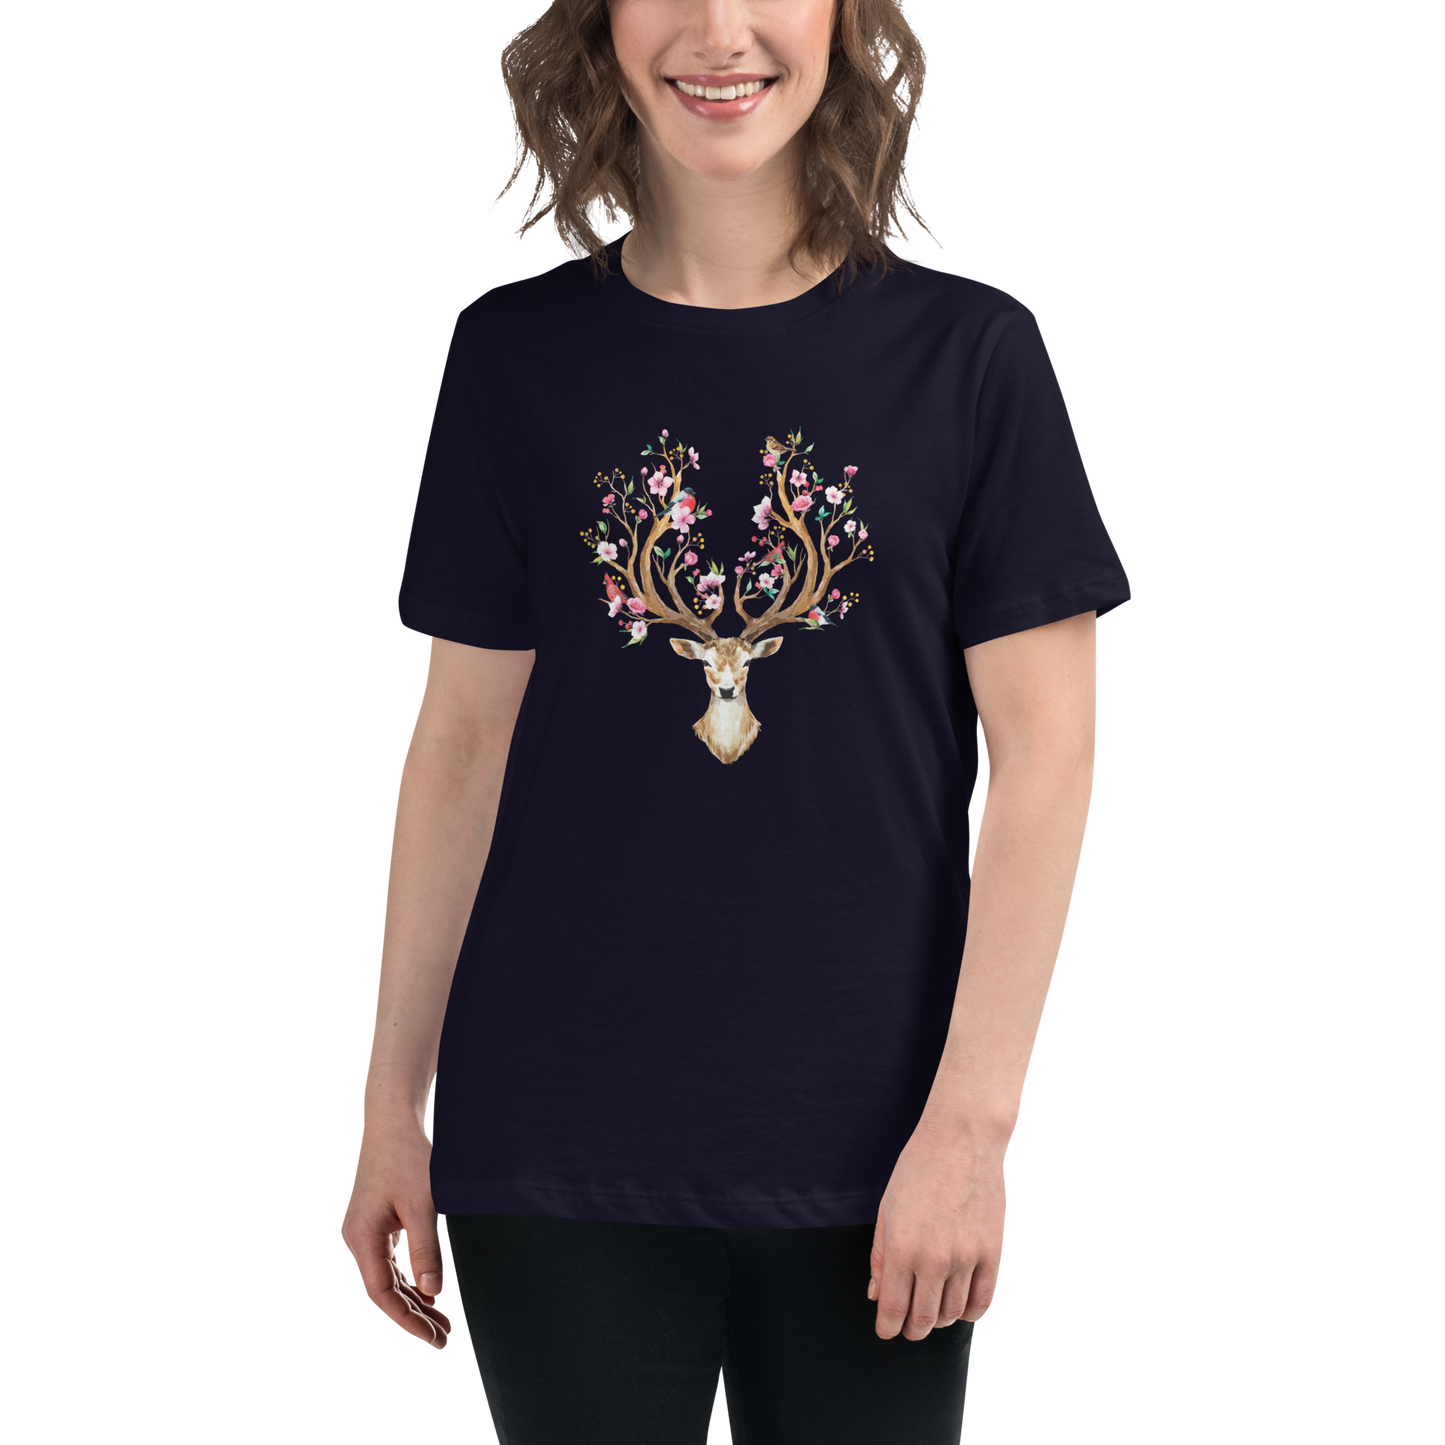 Smiling woman wearing a Women's relaxed navy Deer t-shirt featuring an eye-catching Floral Red Deer graphic on the chest - Women's Graphic Deer Tees - Boozy Fox